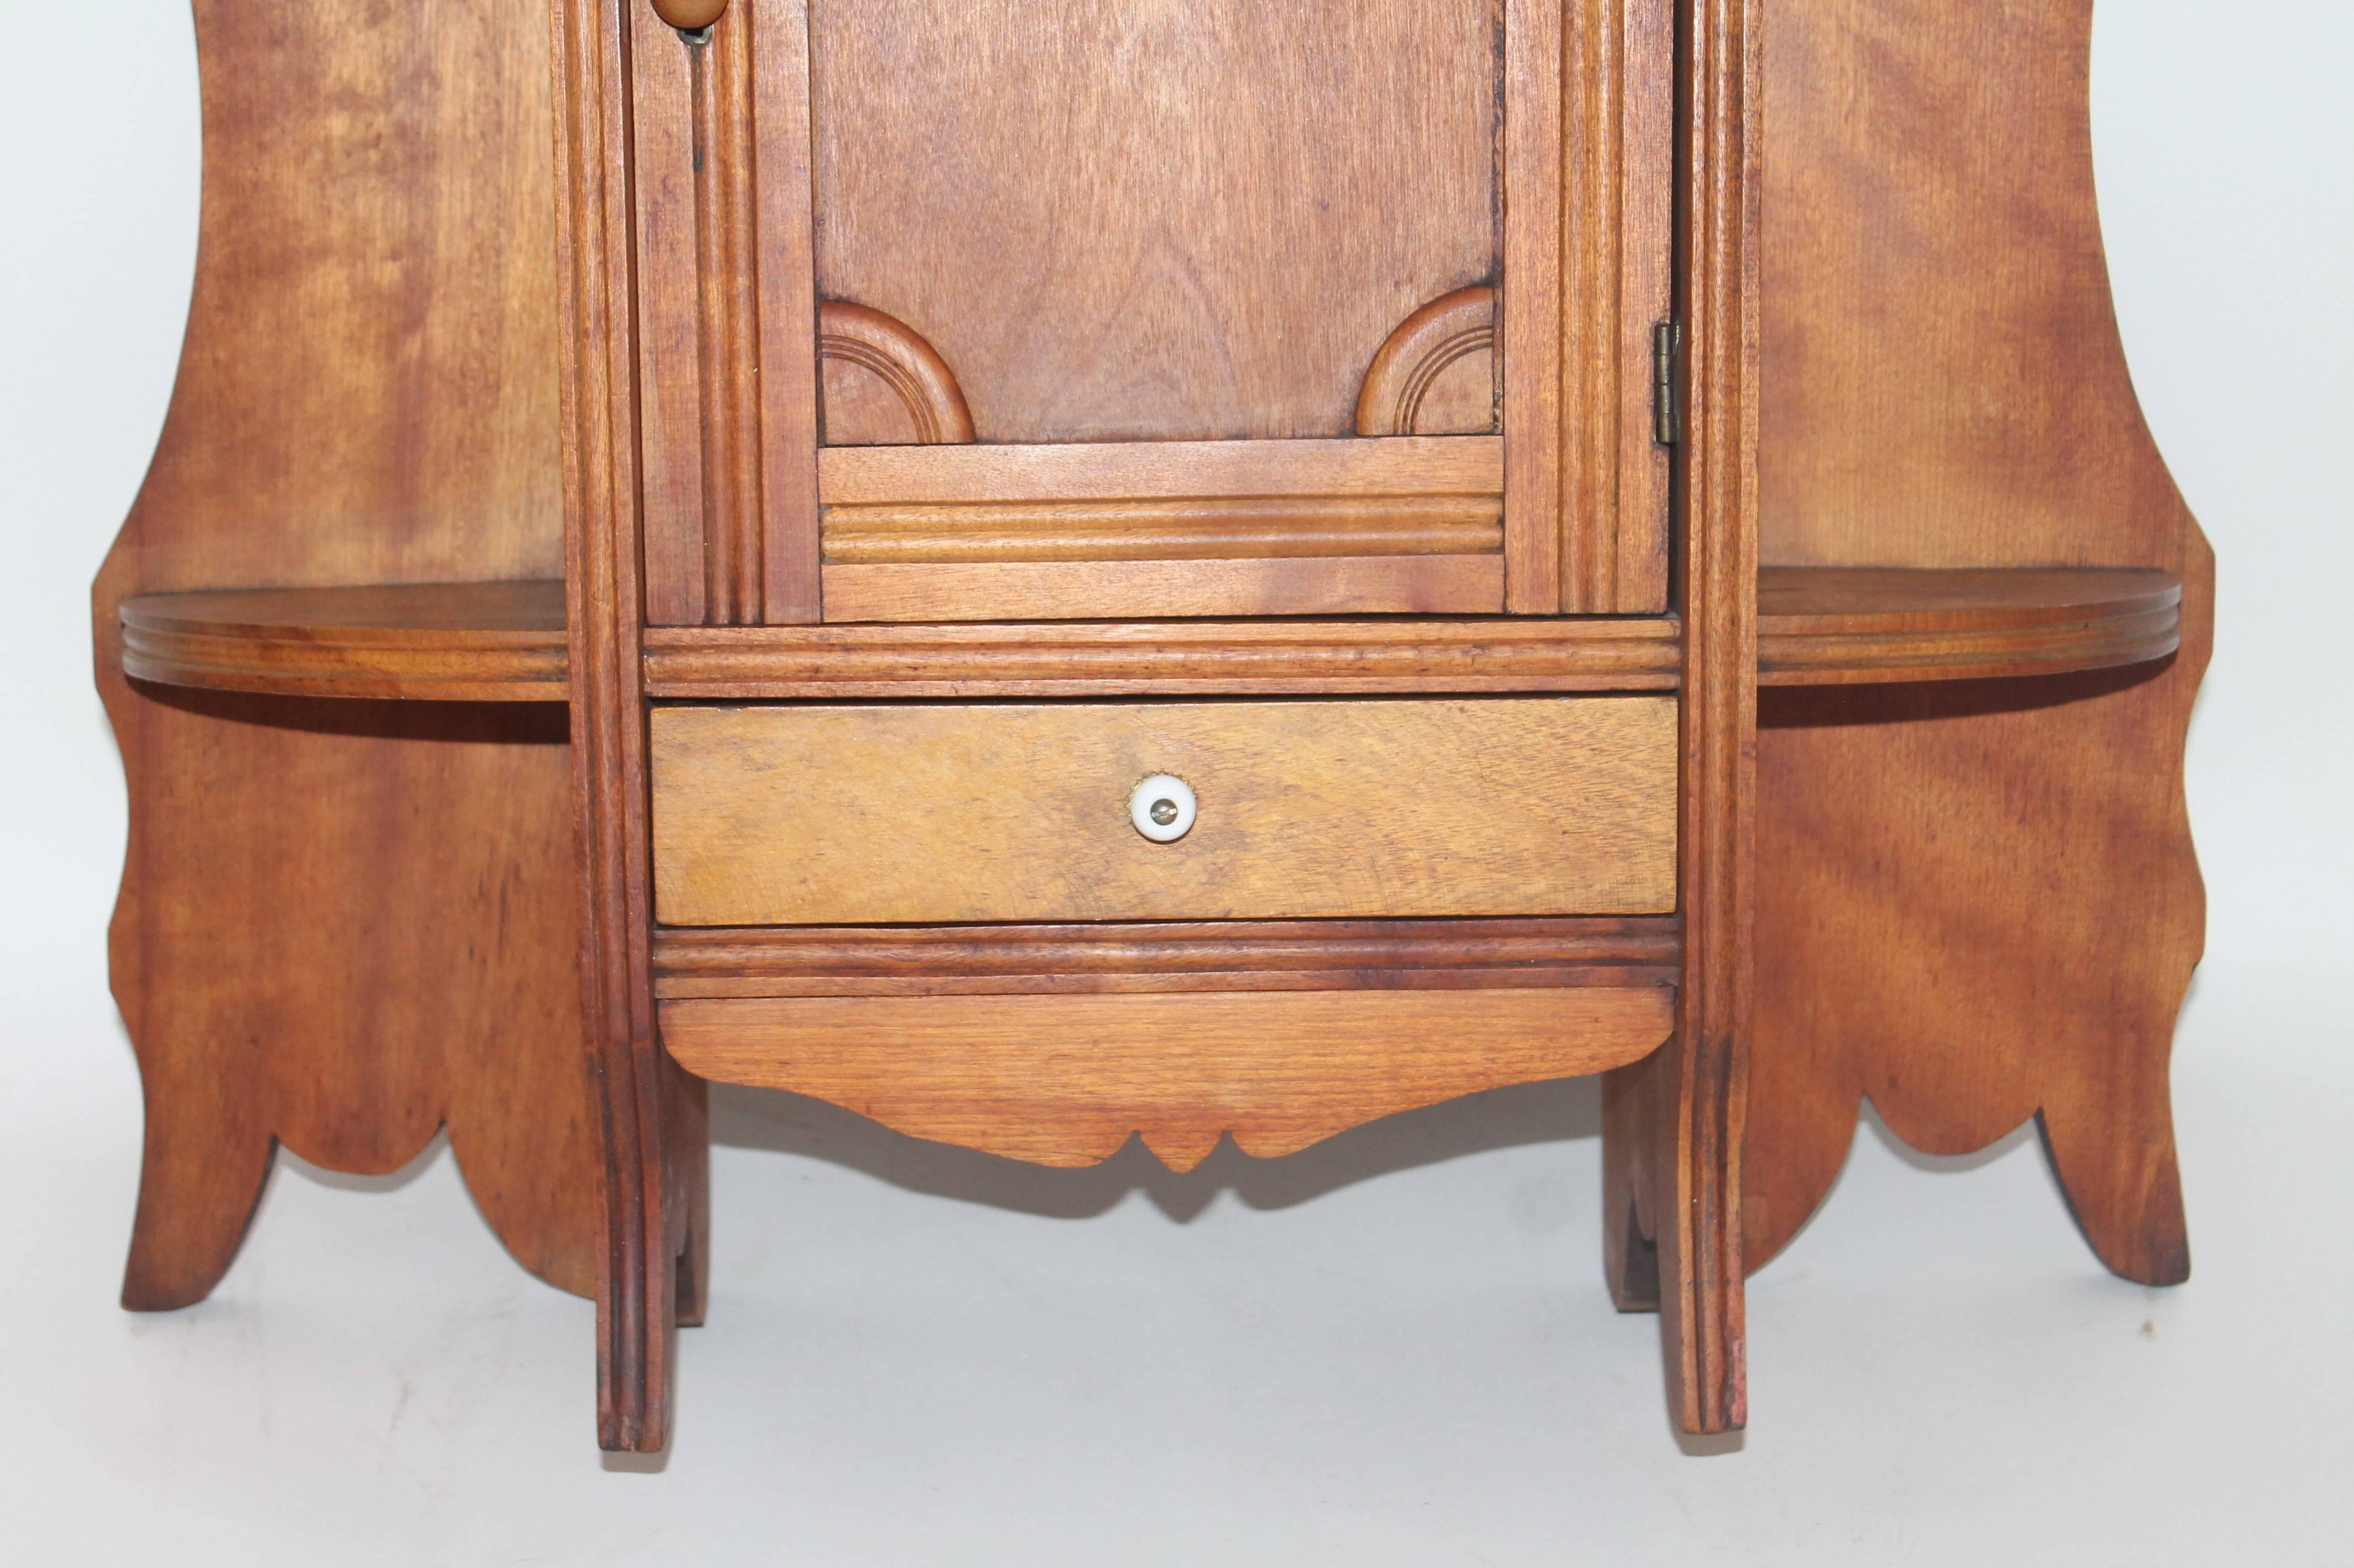 American Hanging Medicine Cabinet with One Drawer, 19th Century Pine